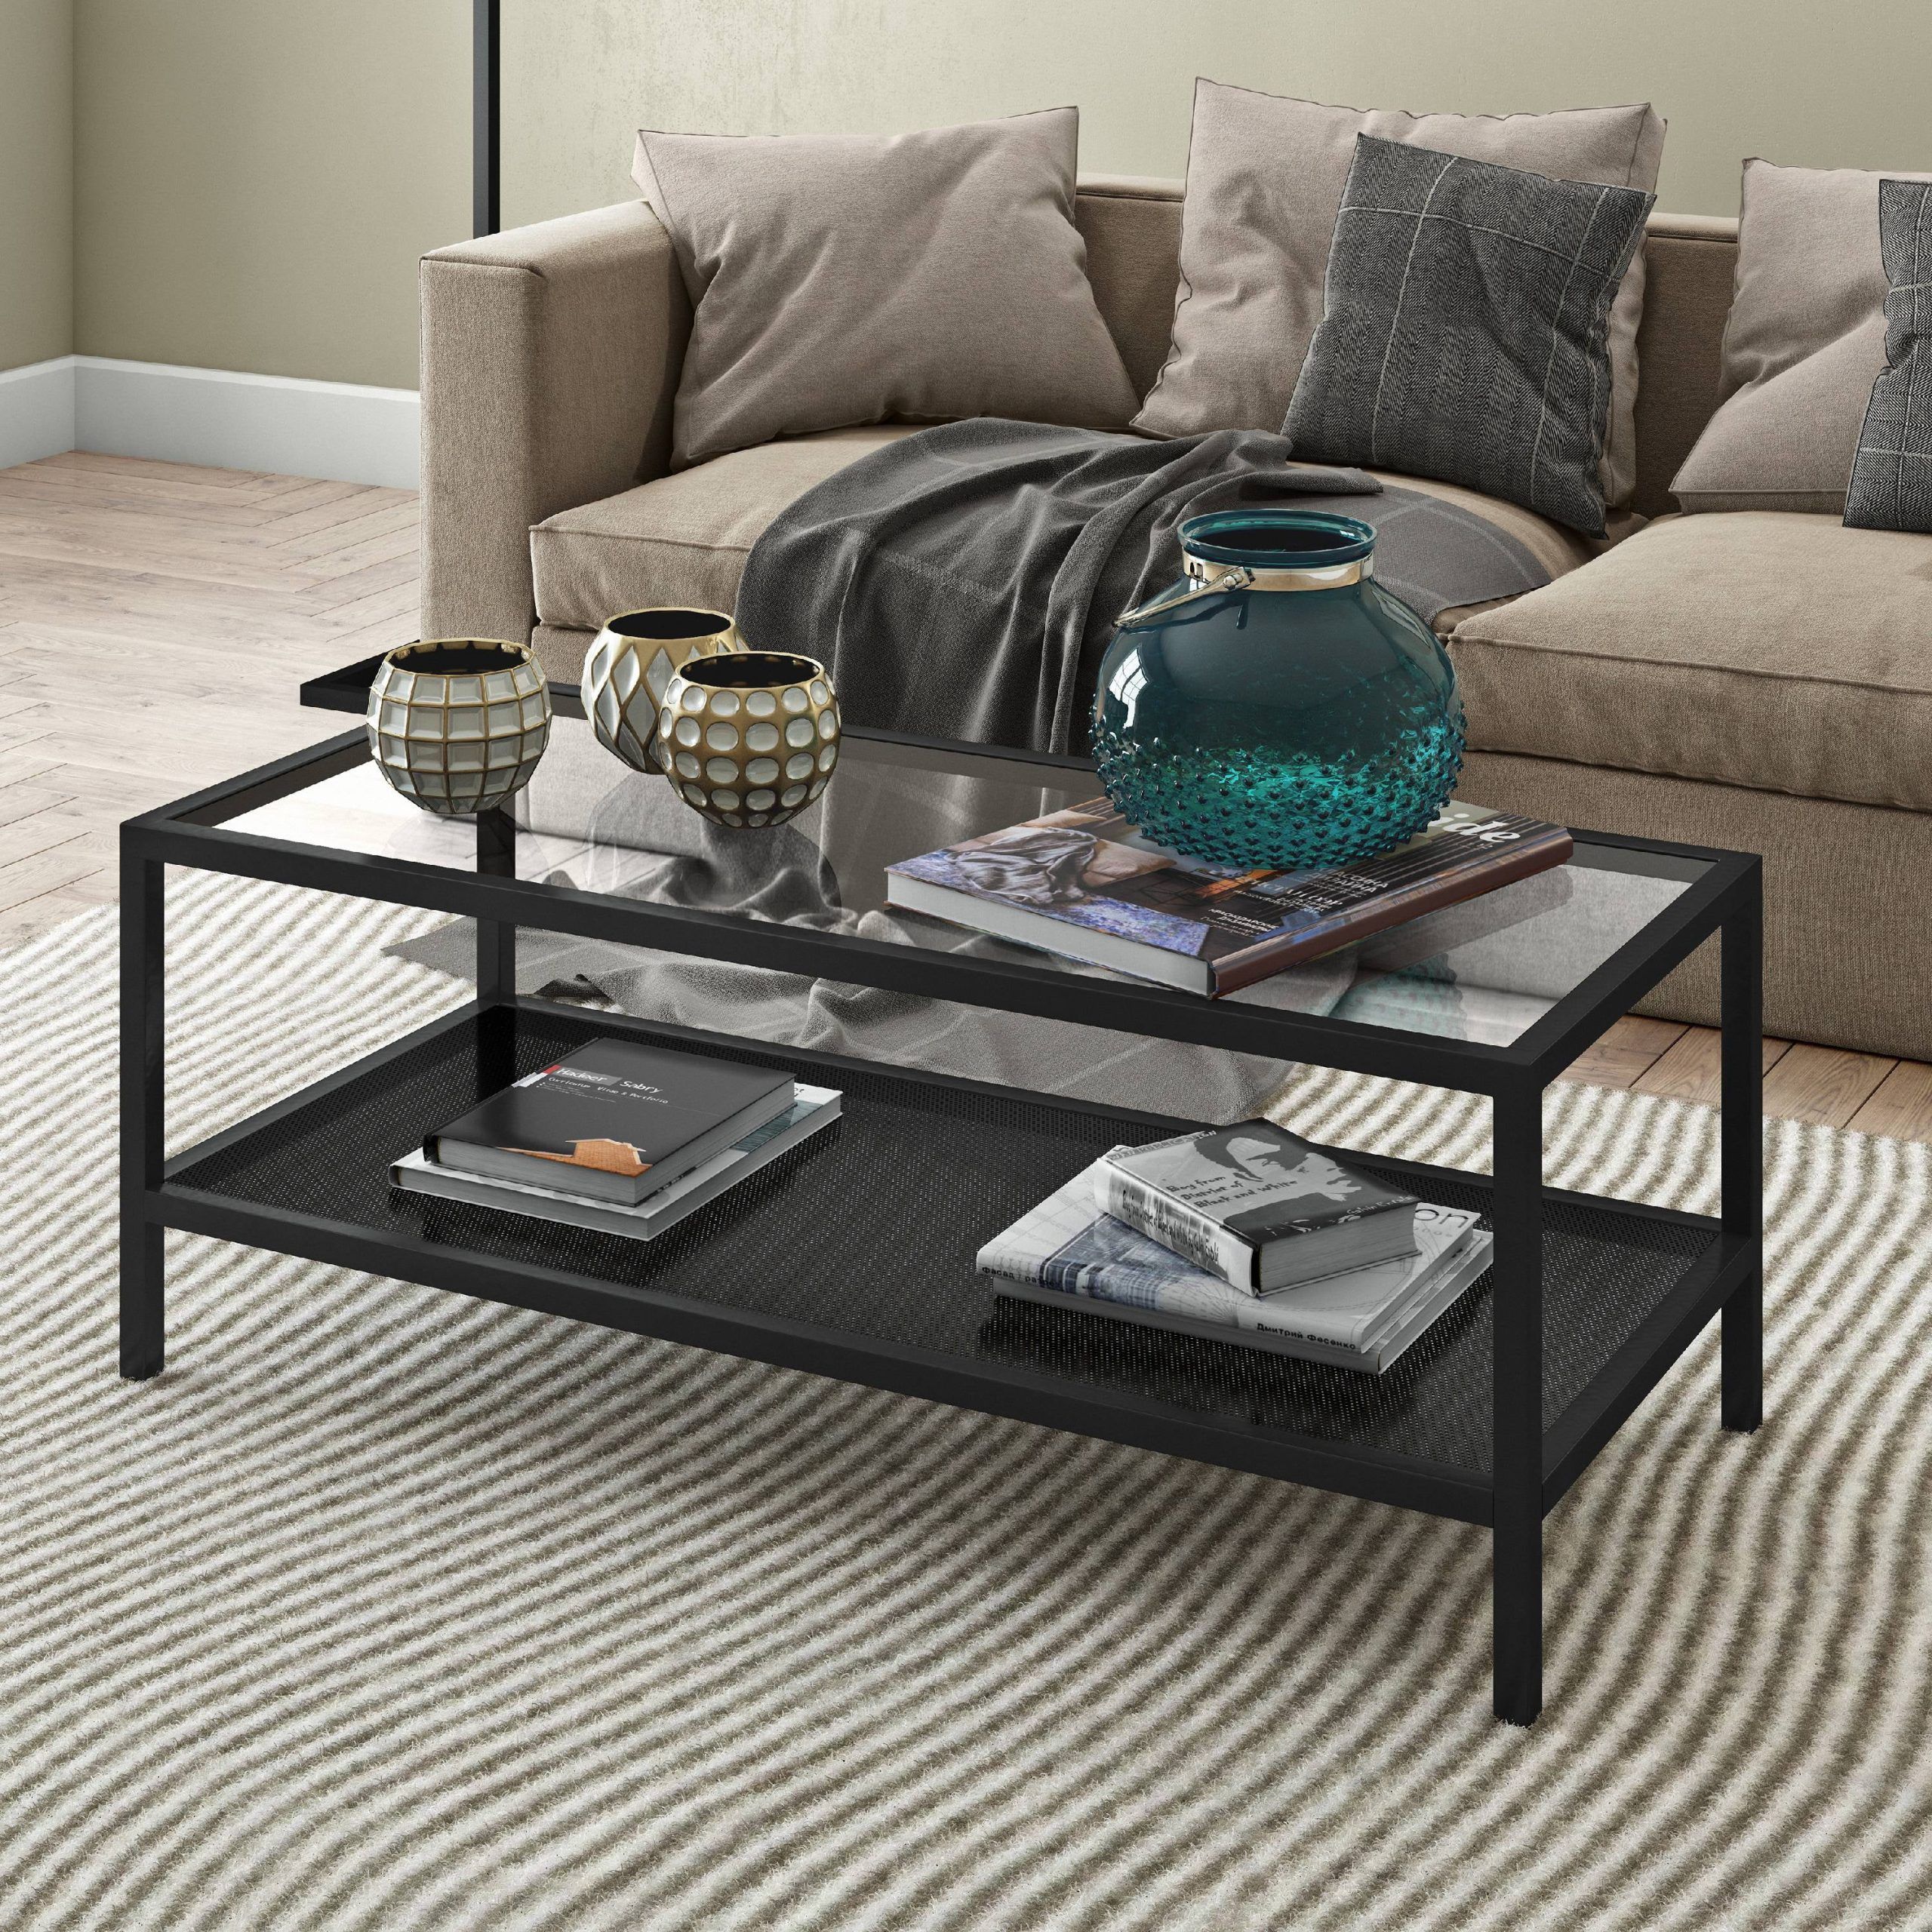 Evelyn&zoe Contemporary Metal Coffee Table With Glass Top – Walmart Within Studio 350 Black Metal Coffee Tables (View 14 of 15)